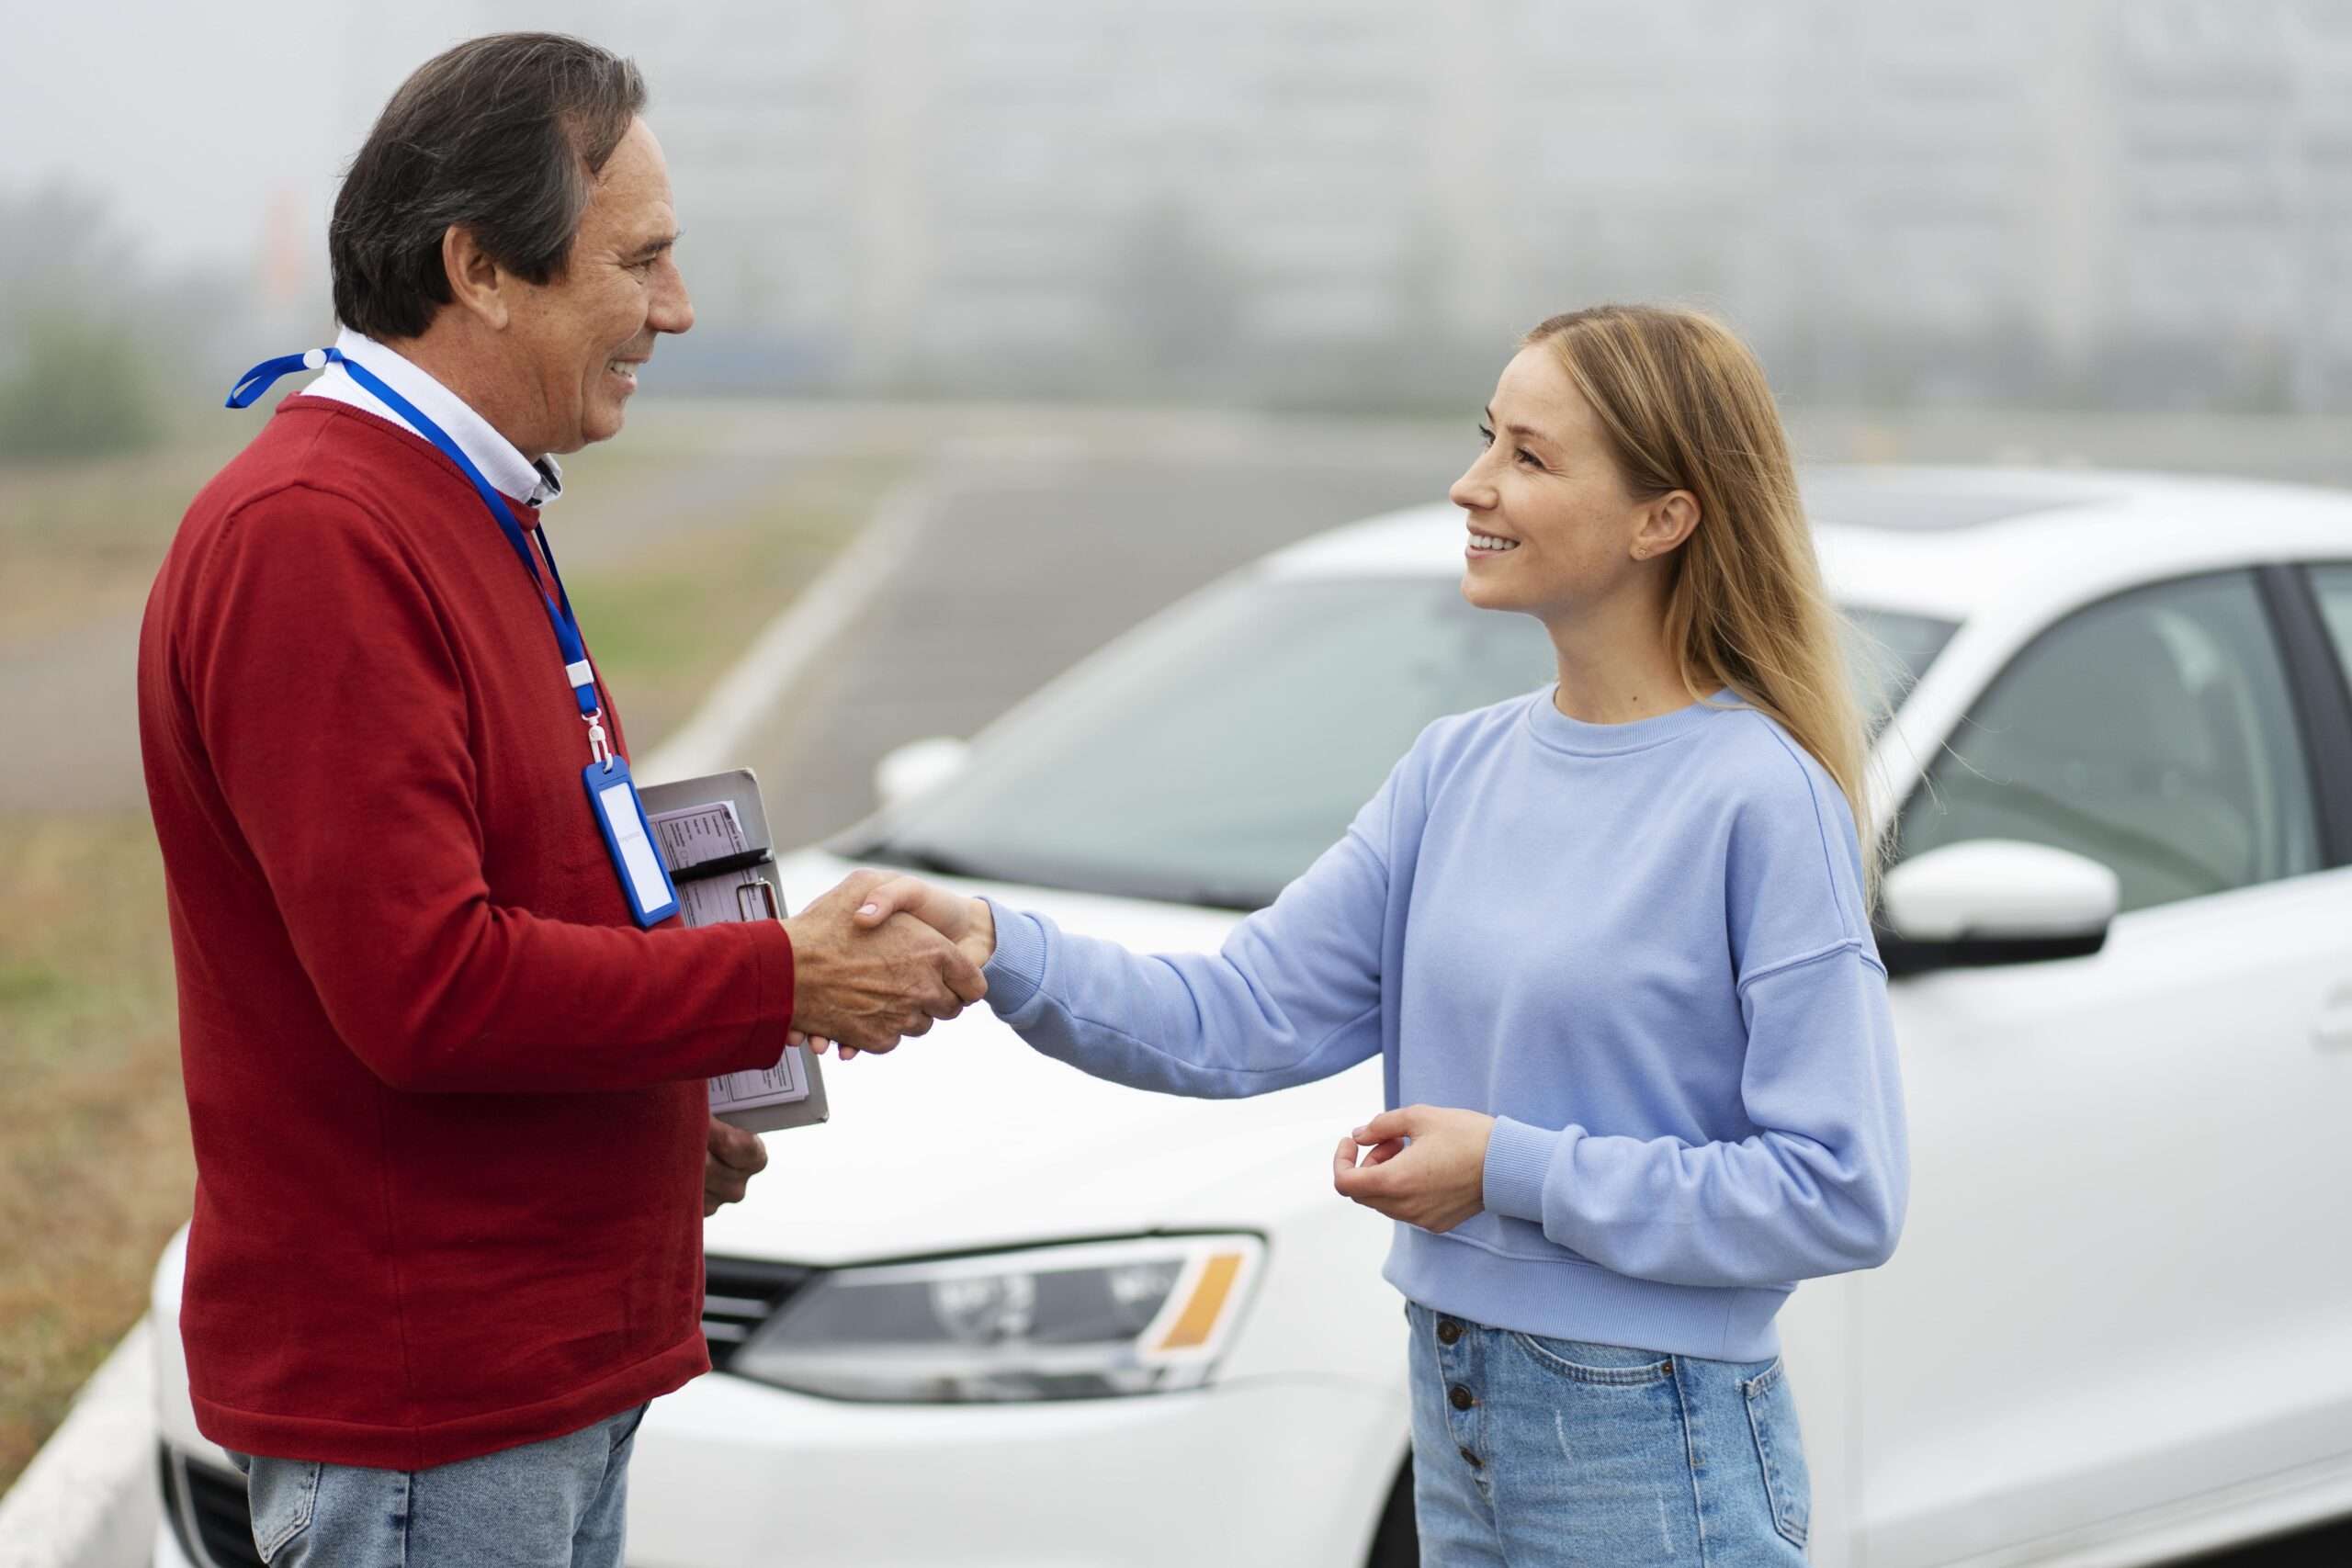 How to Buy a Used Car from a Private Seller